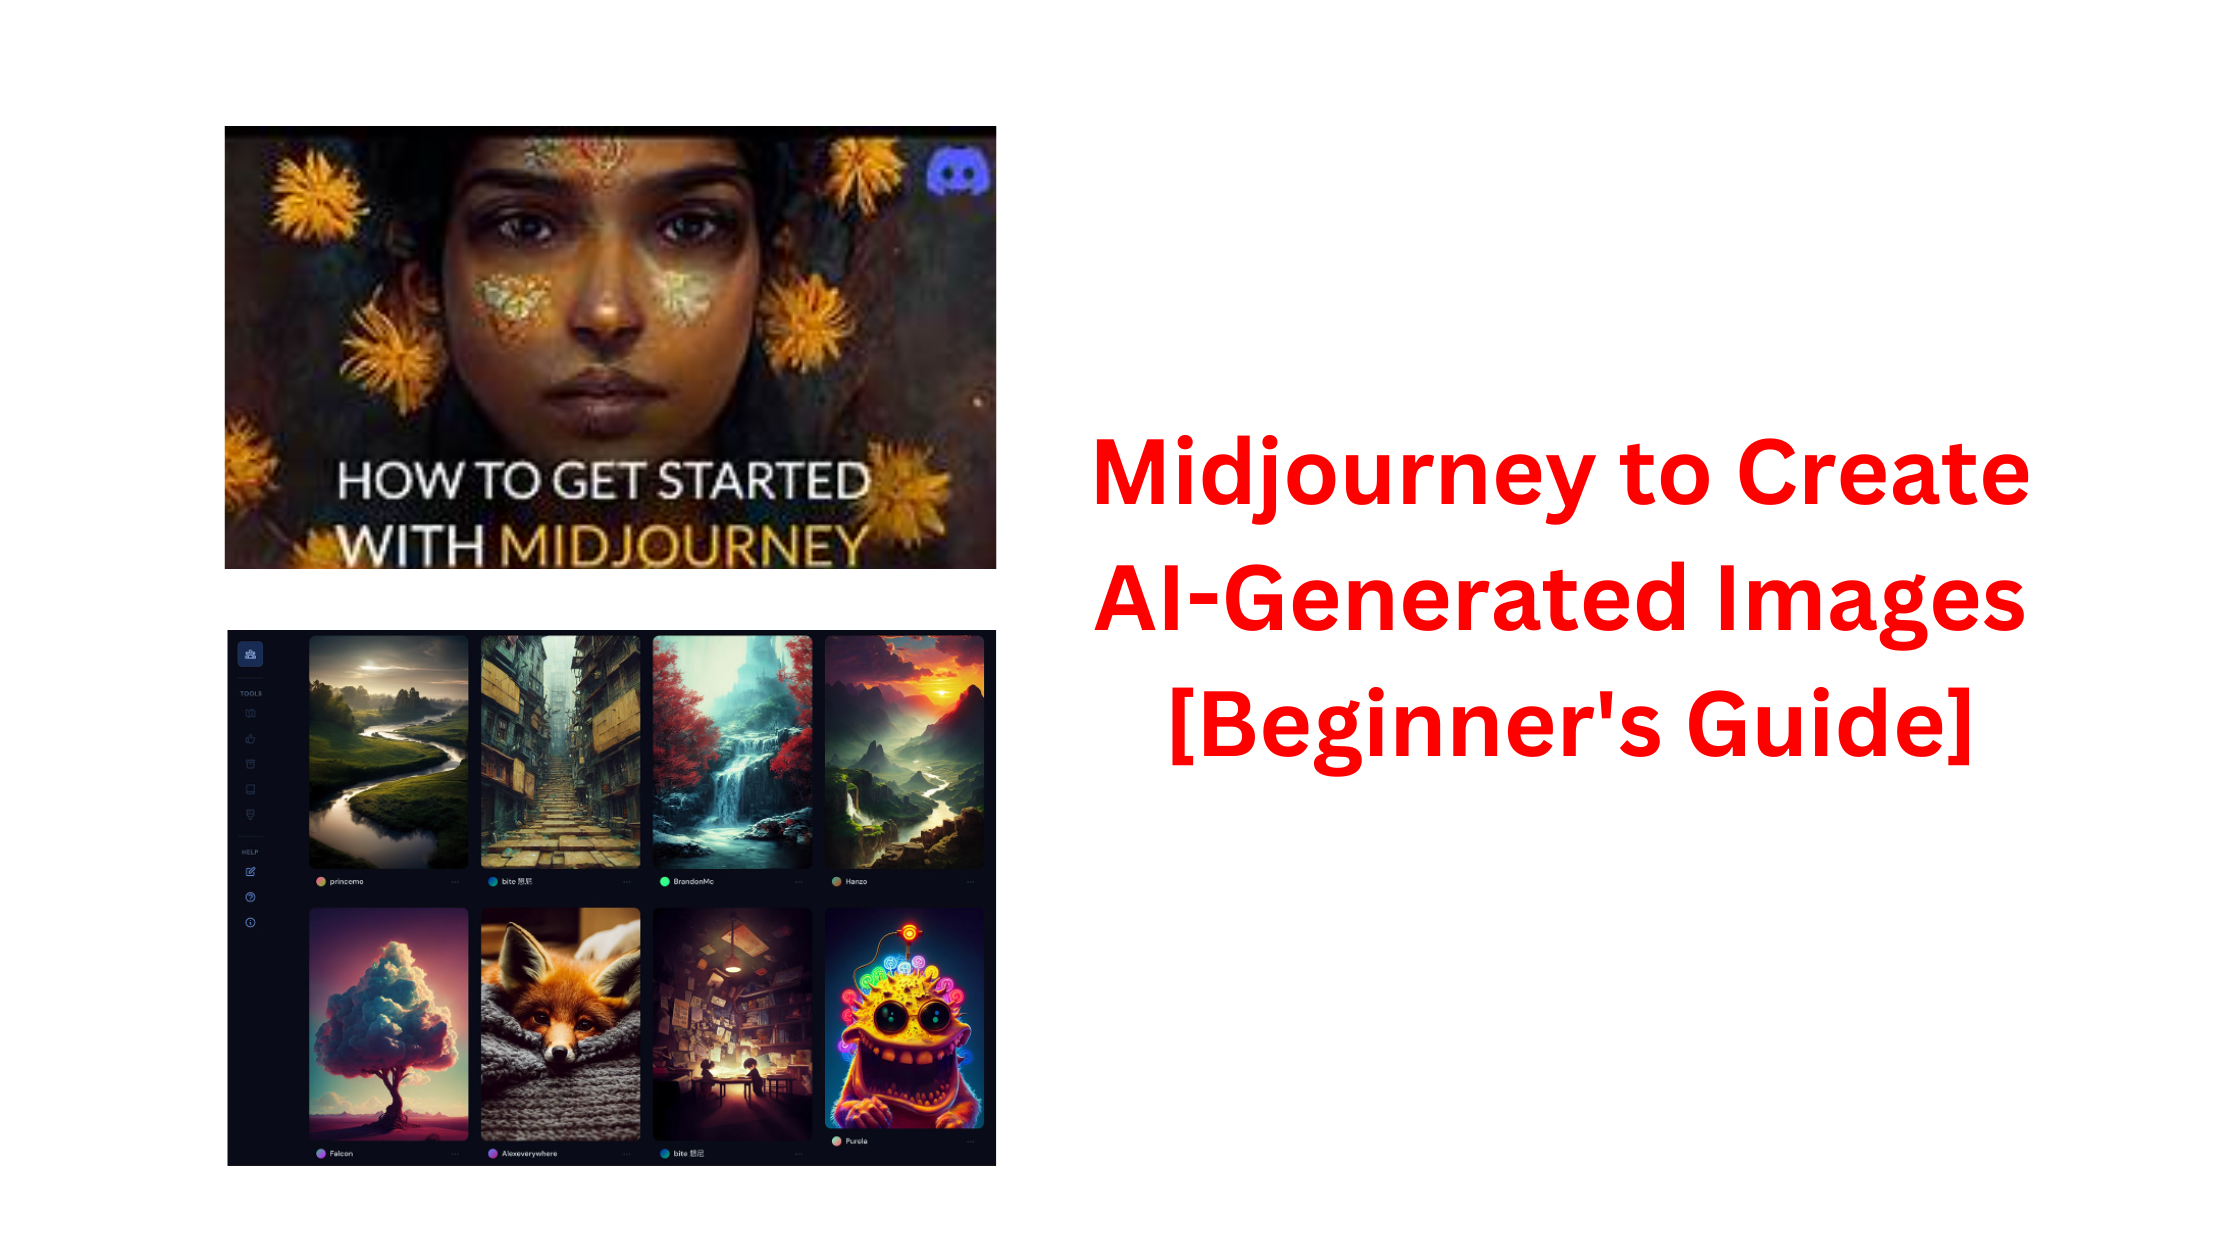 How to Use Midjourney to Create AI Art in 2023 (Detailed Tutorial)